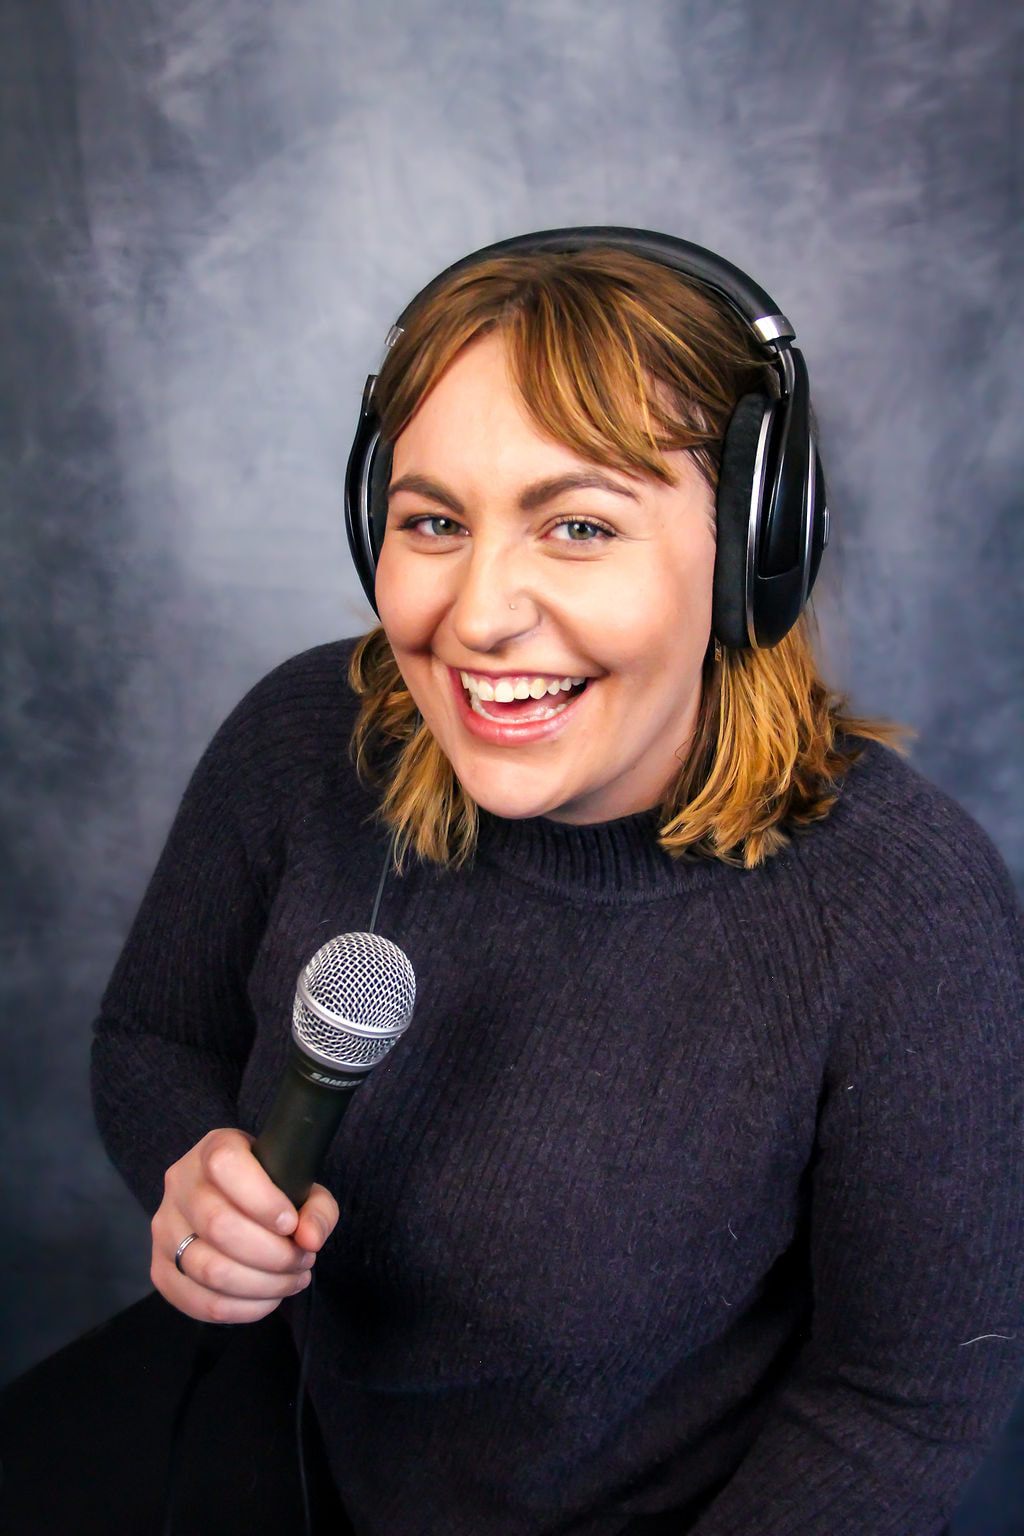 Image of a smiling caucasian woman wearing over-ear headphones and a purple sweater in front of a grep backdrop. She has should-length brown hair and is holding a microphone.